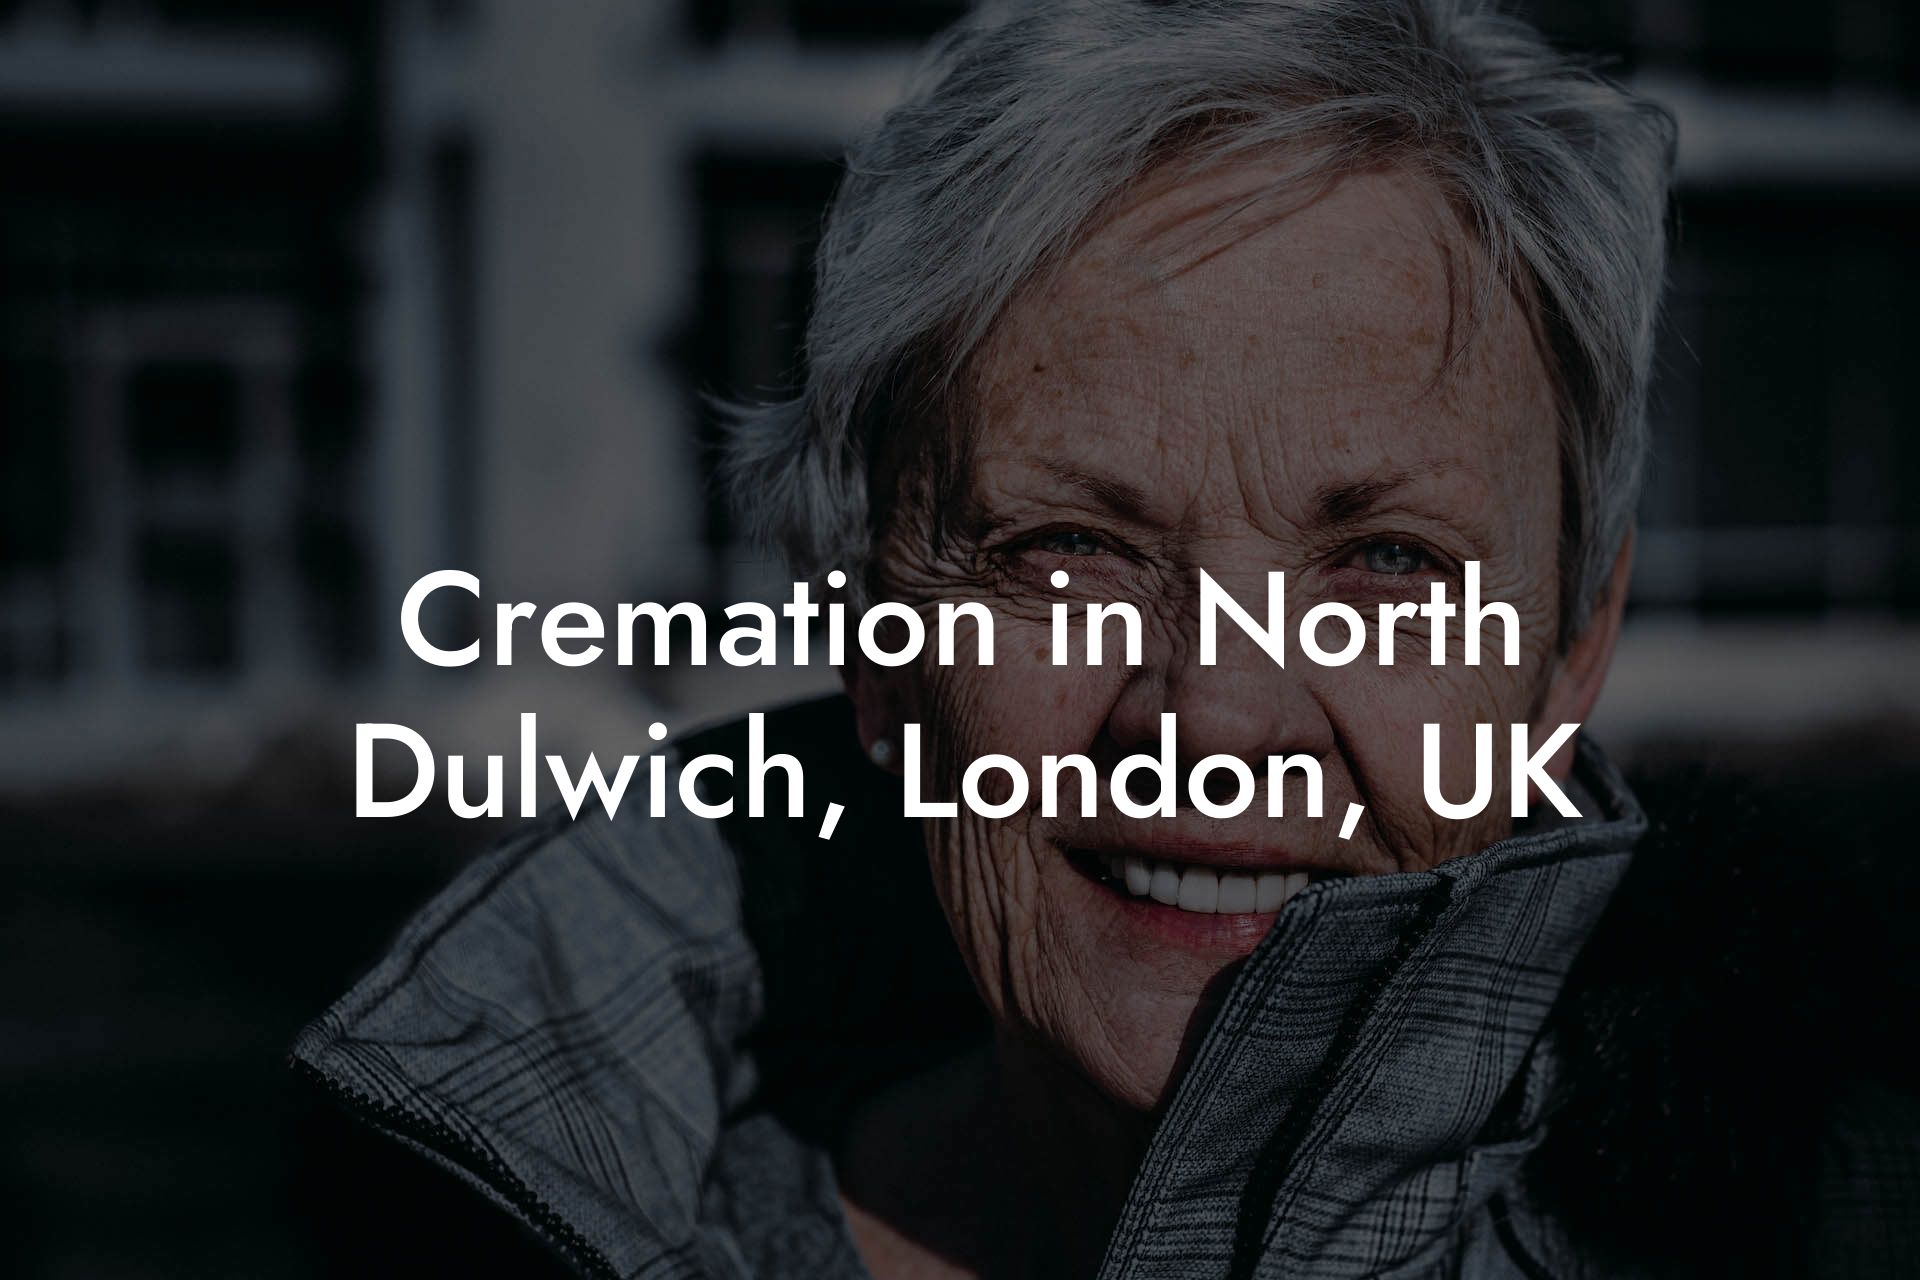 Cremation in North Dulwich, London, UK